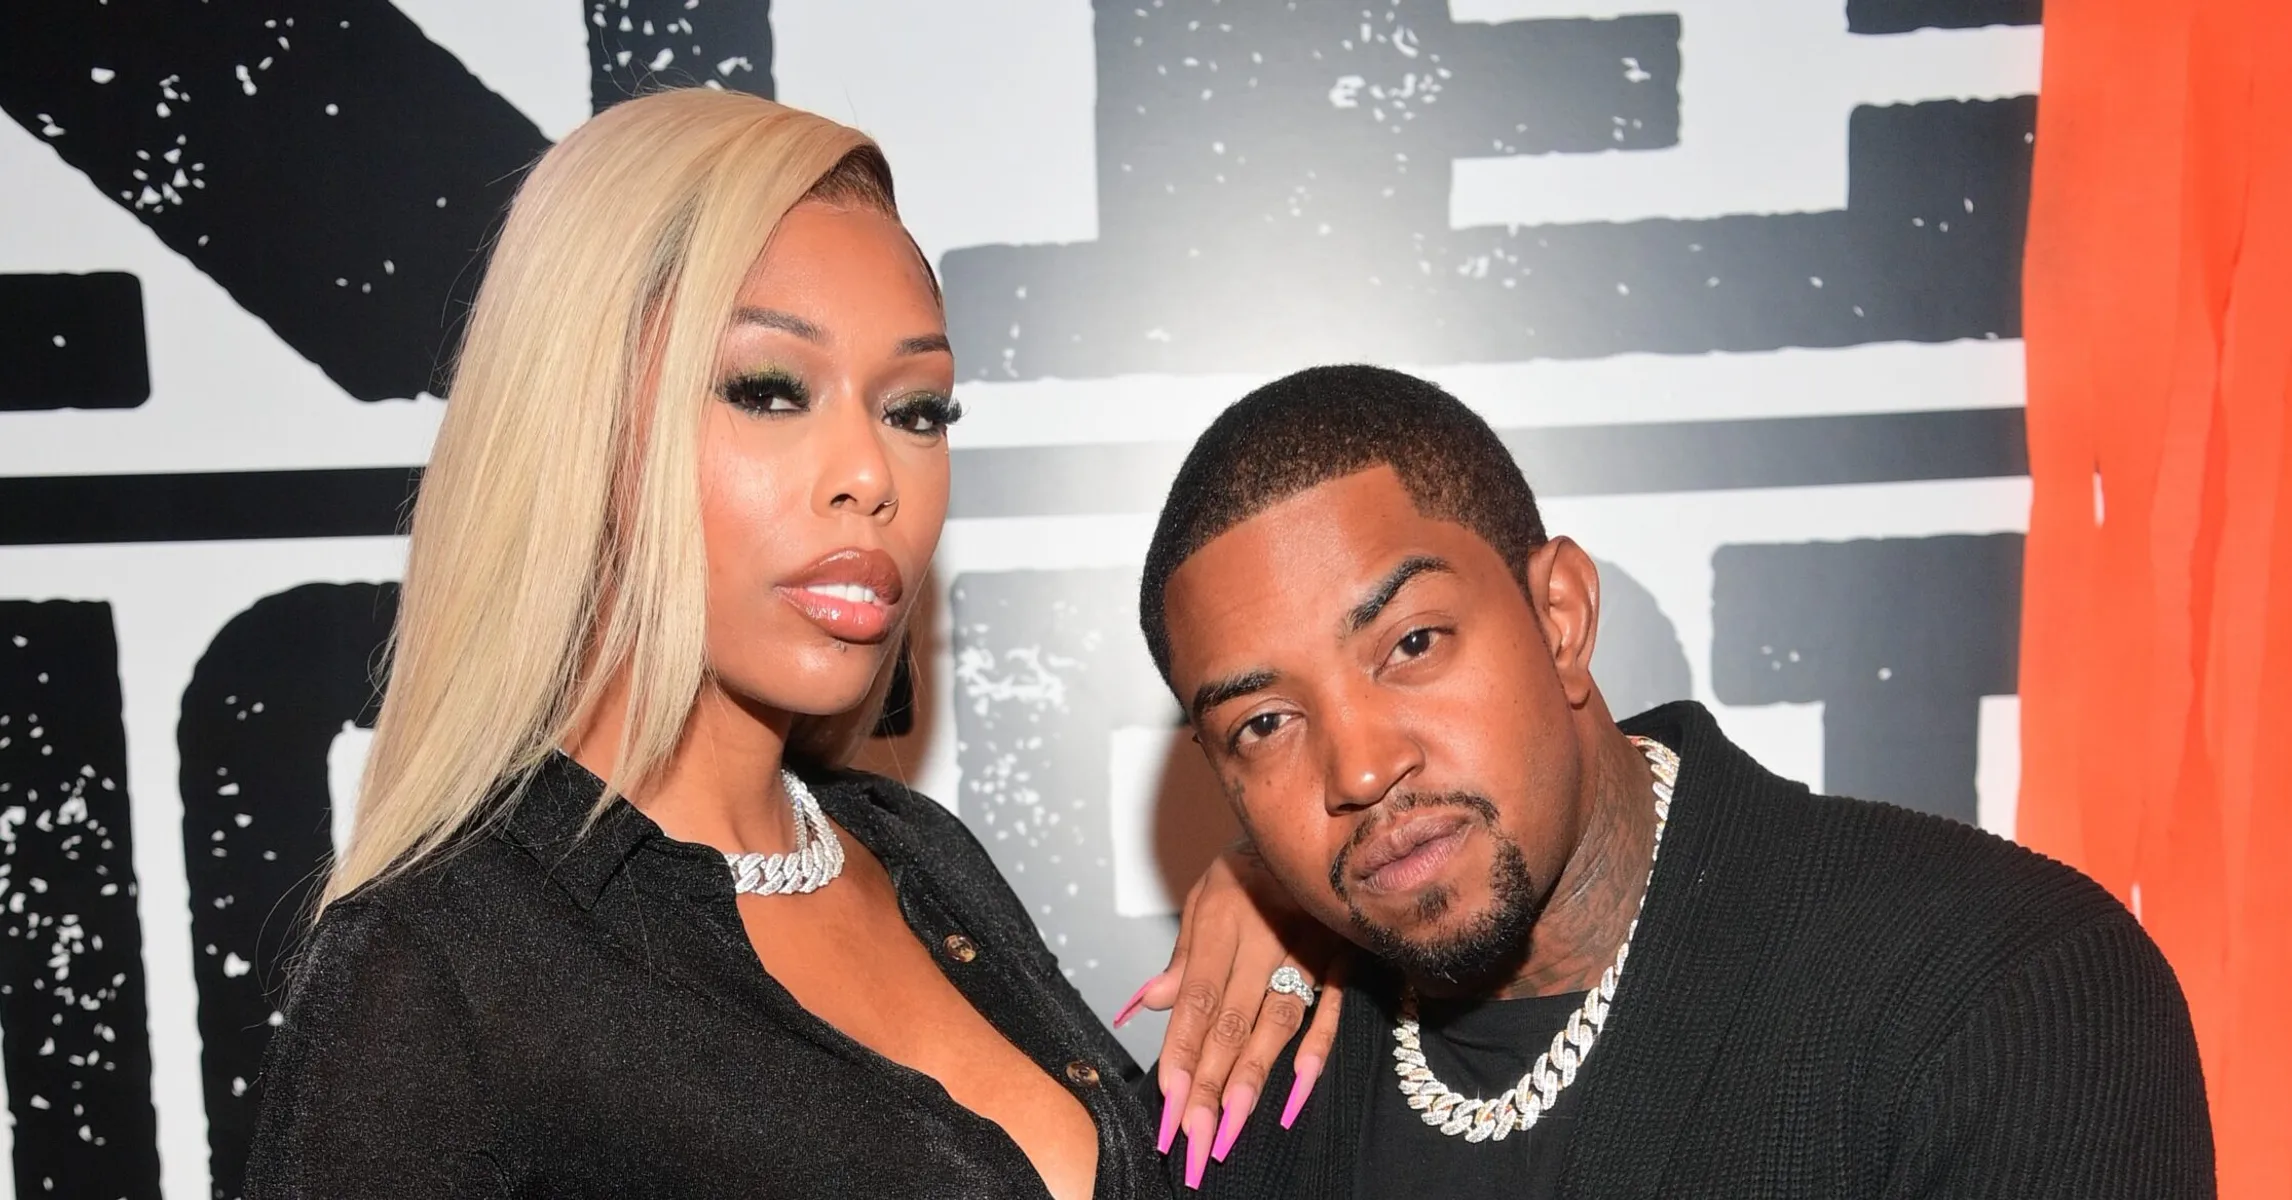 Lil Scrappy and Bambi spark reunion rumors after club outing